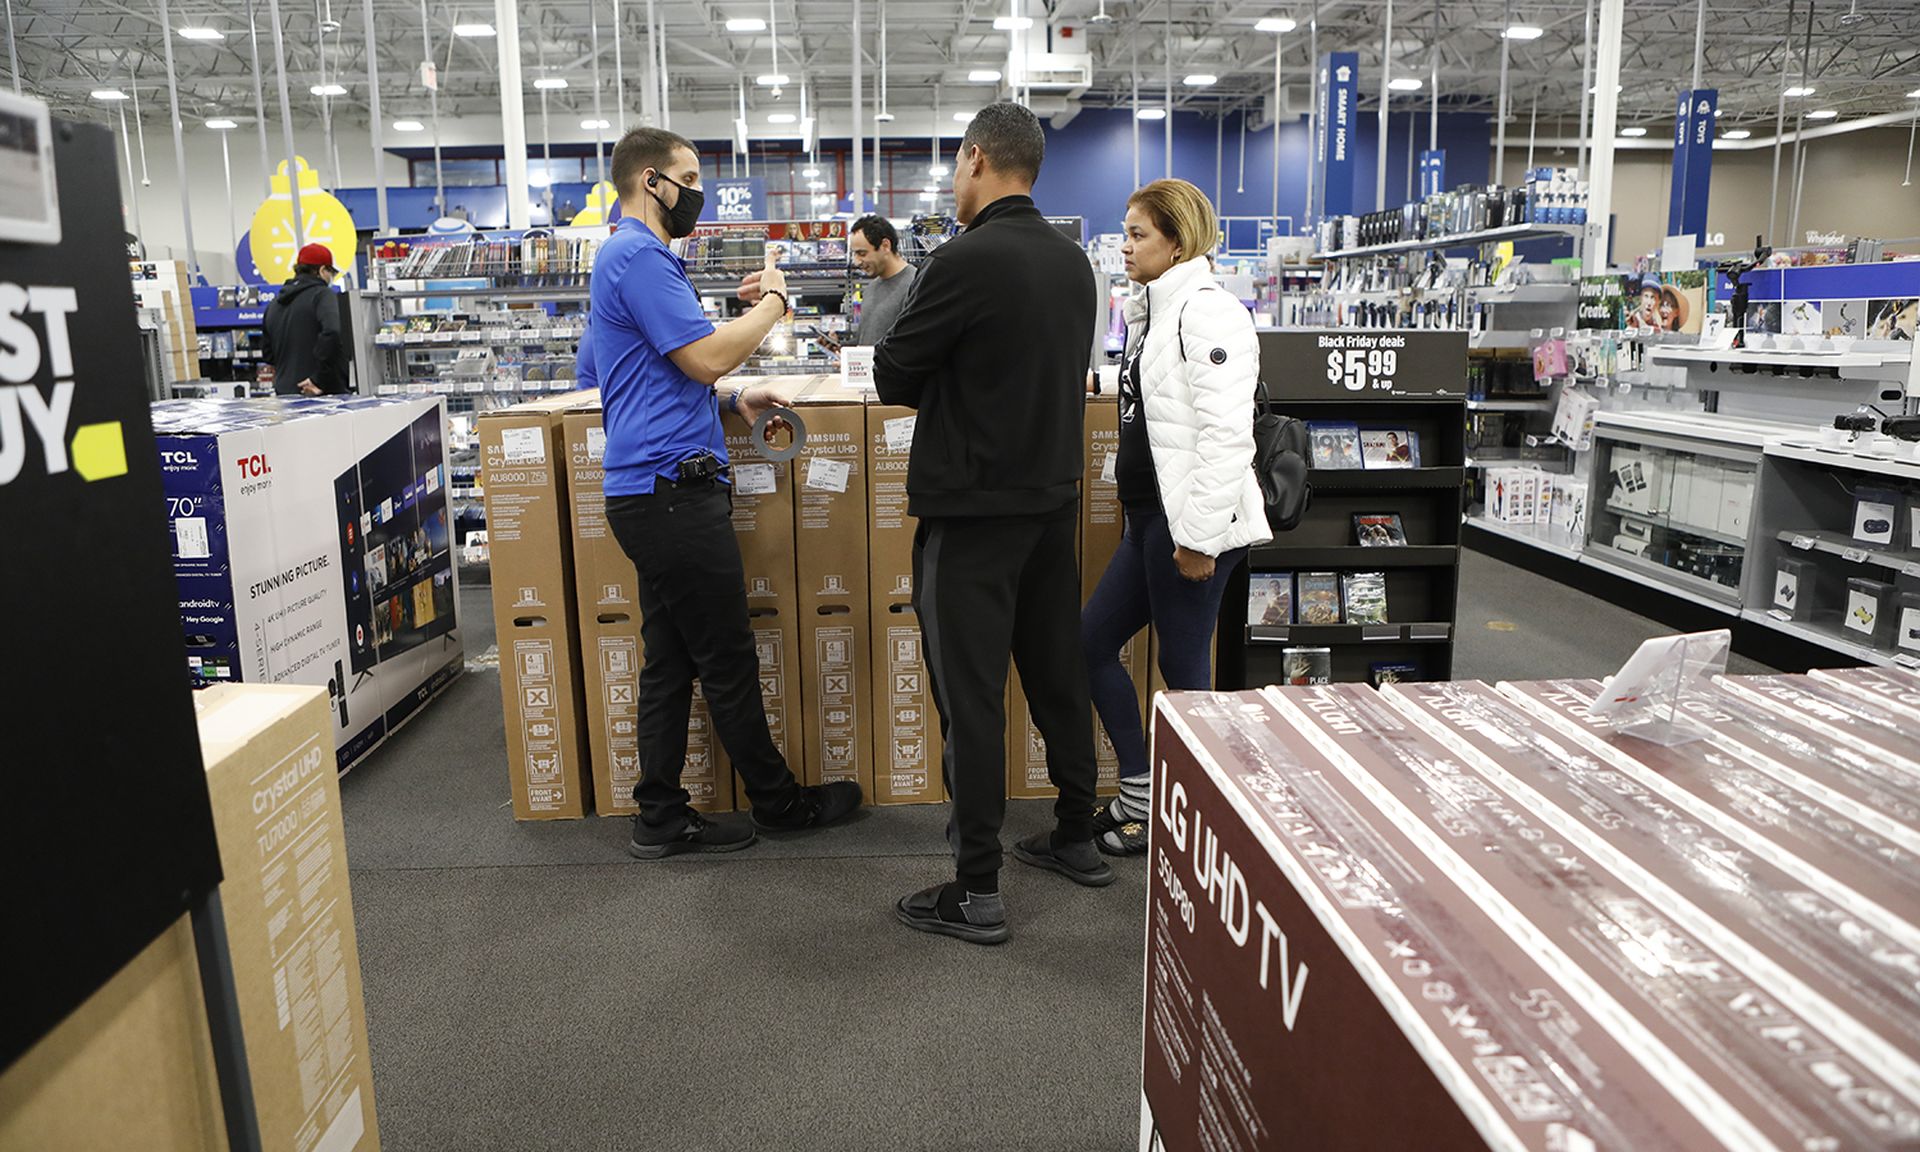 Shoppers look for deals on large screen televisions at a store